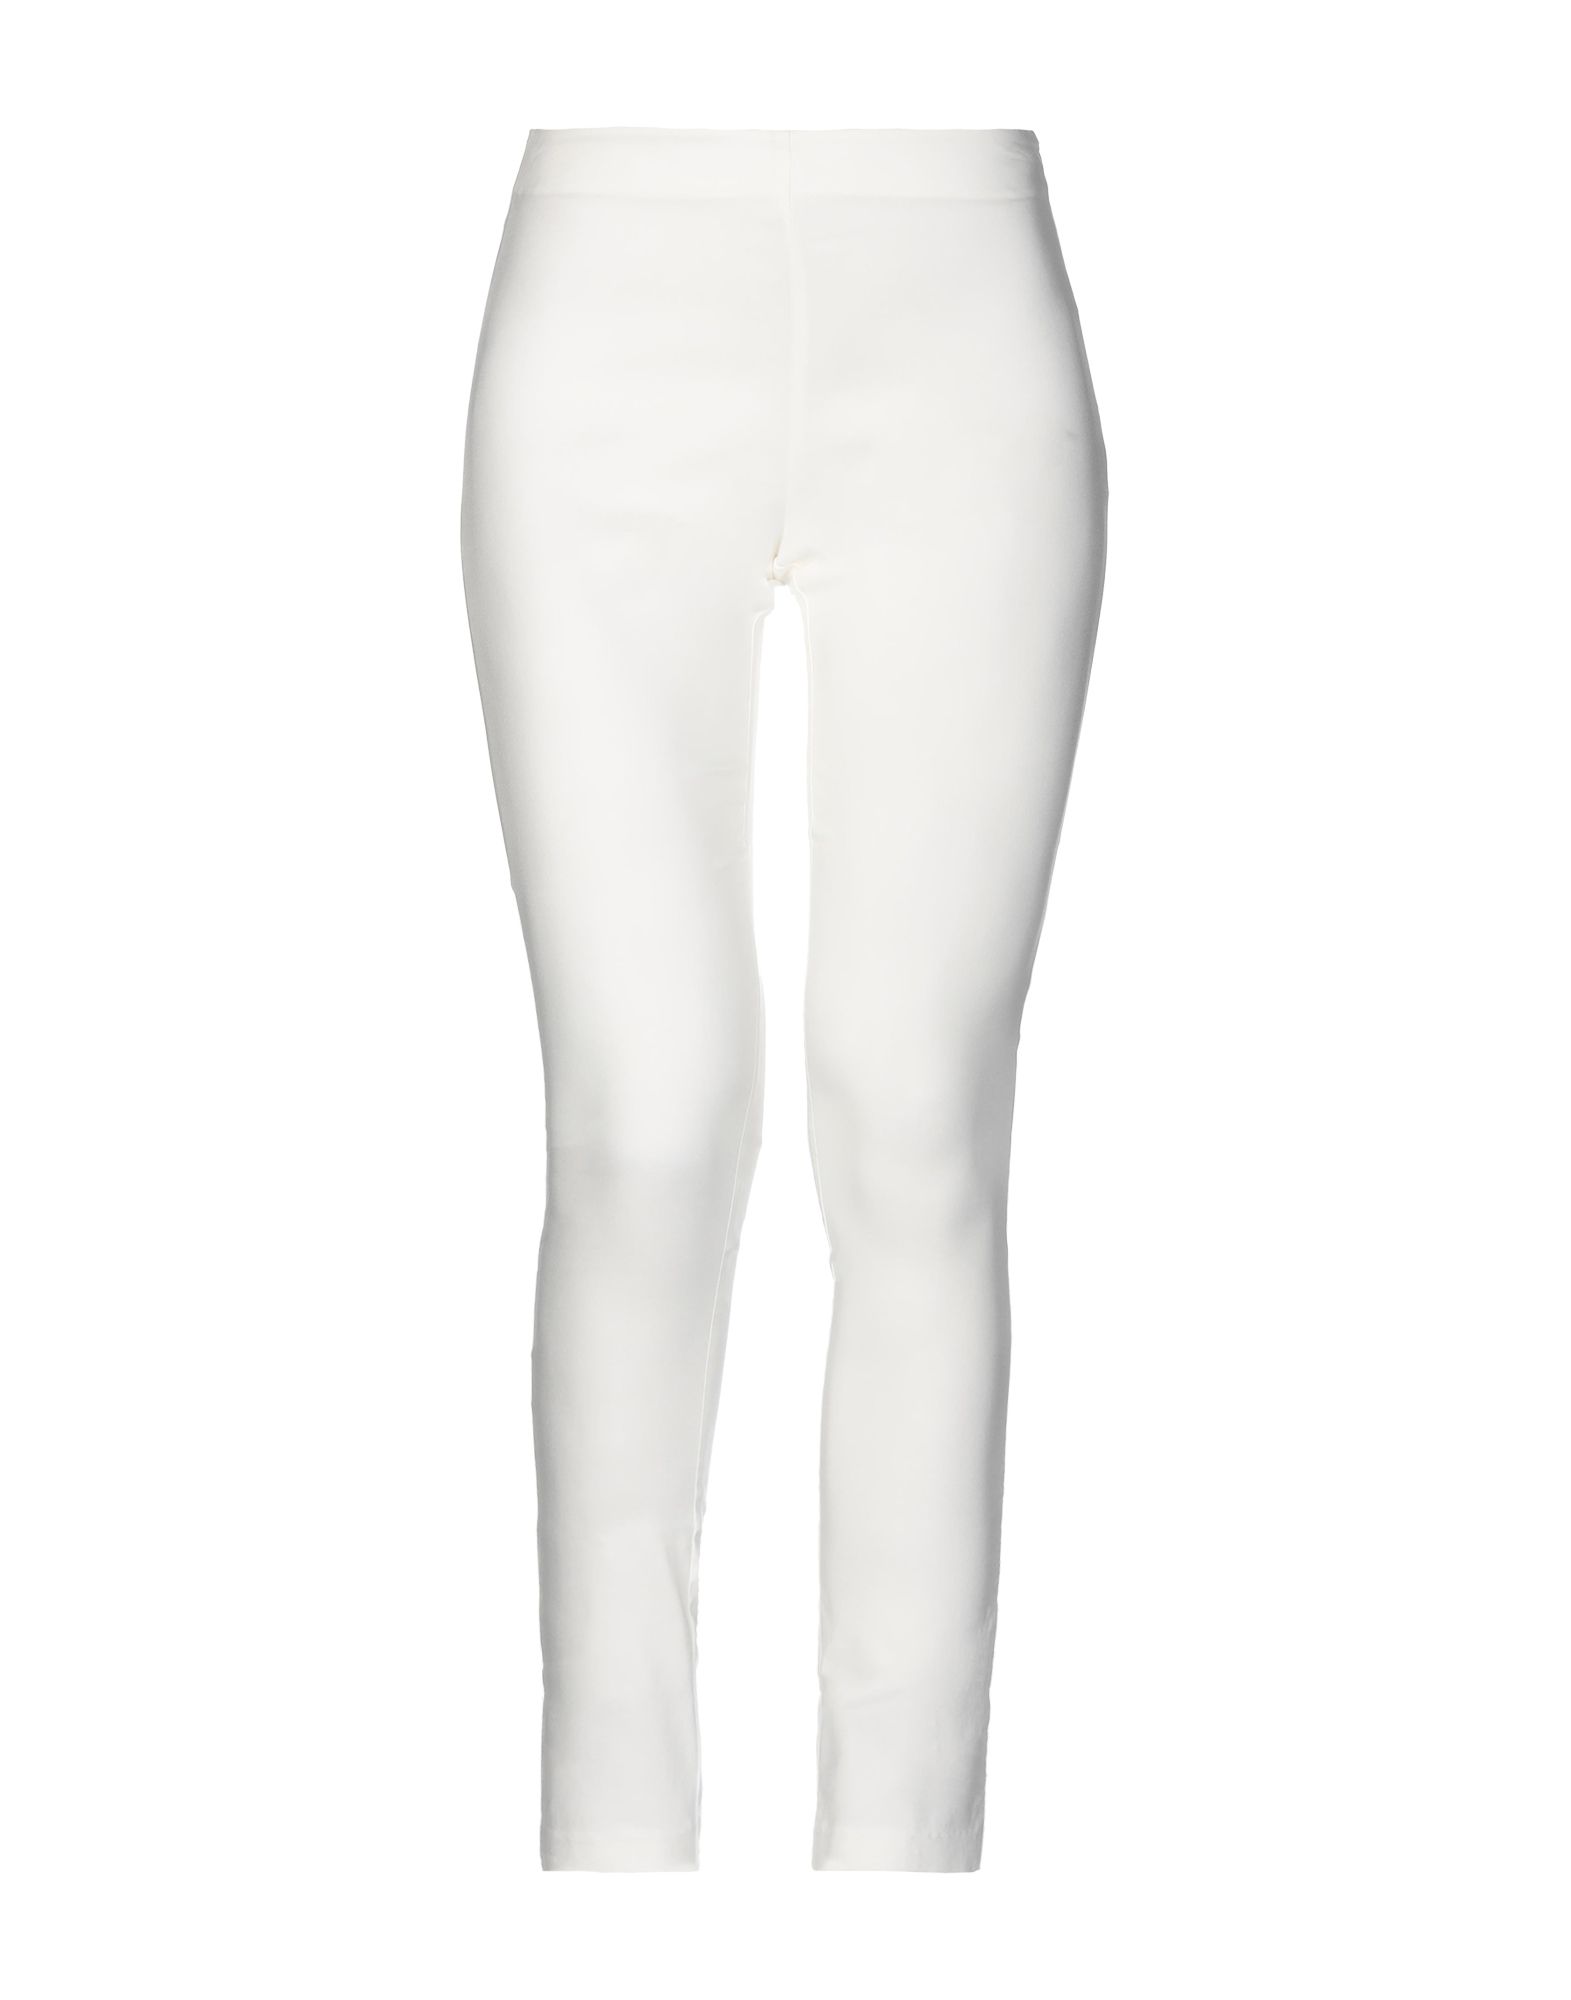 Rue 8isquit Pants In White